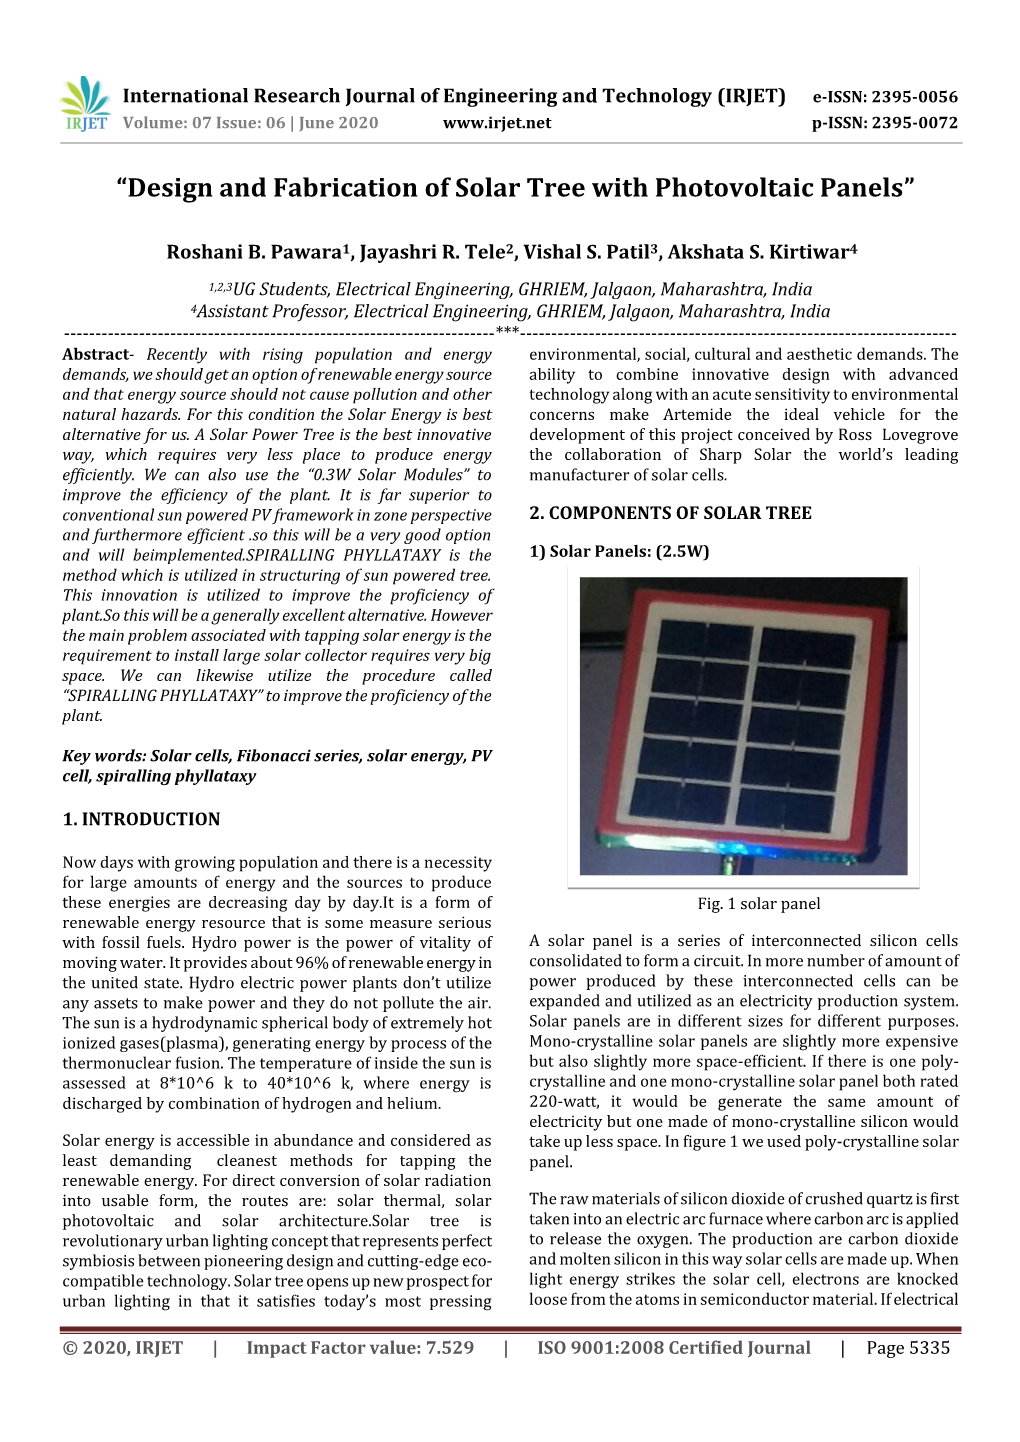 “Design and Fabrication of Solar Tree with Photovoltaic Panels”